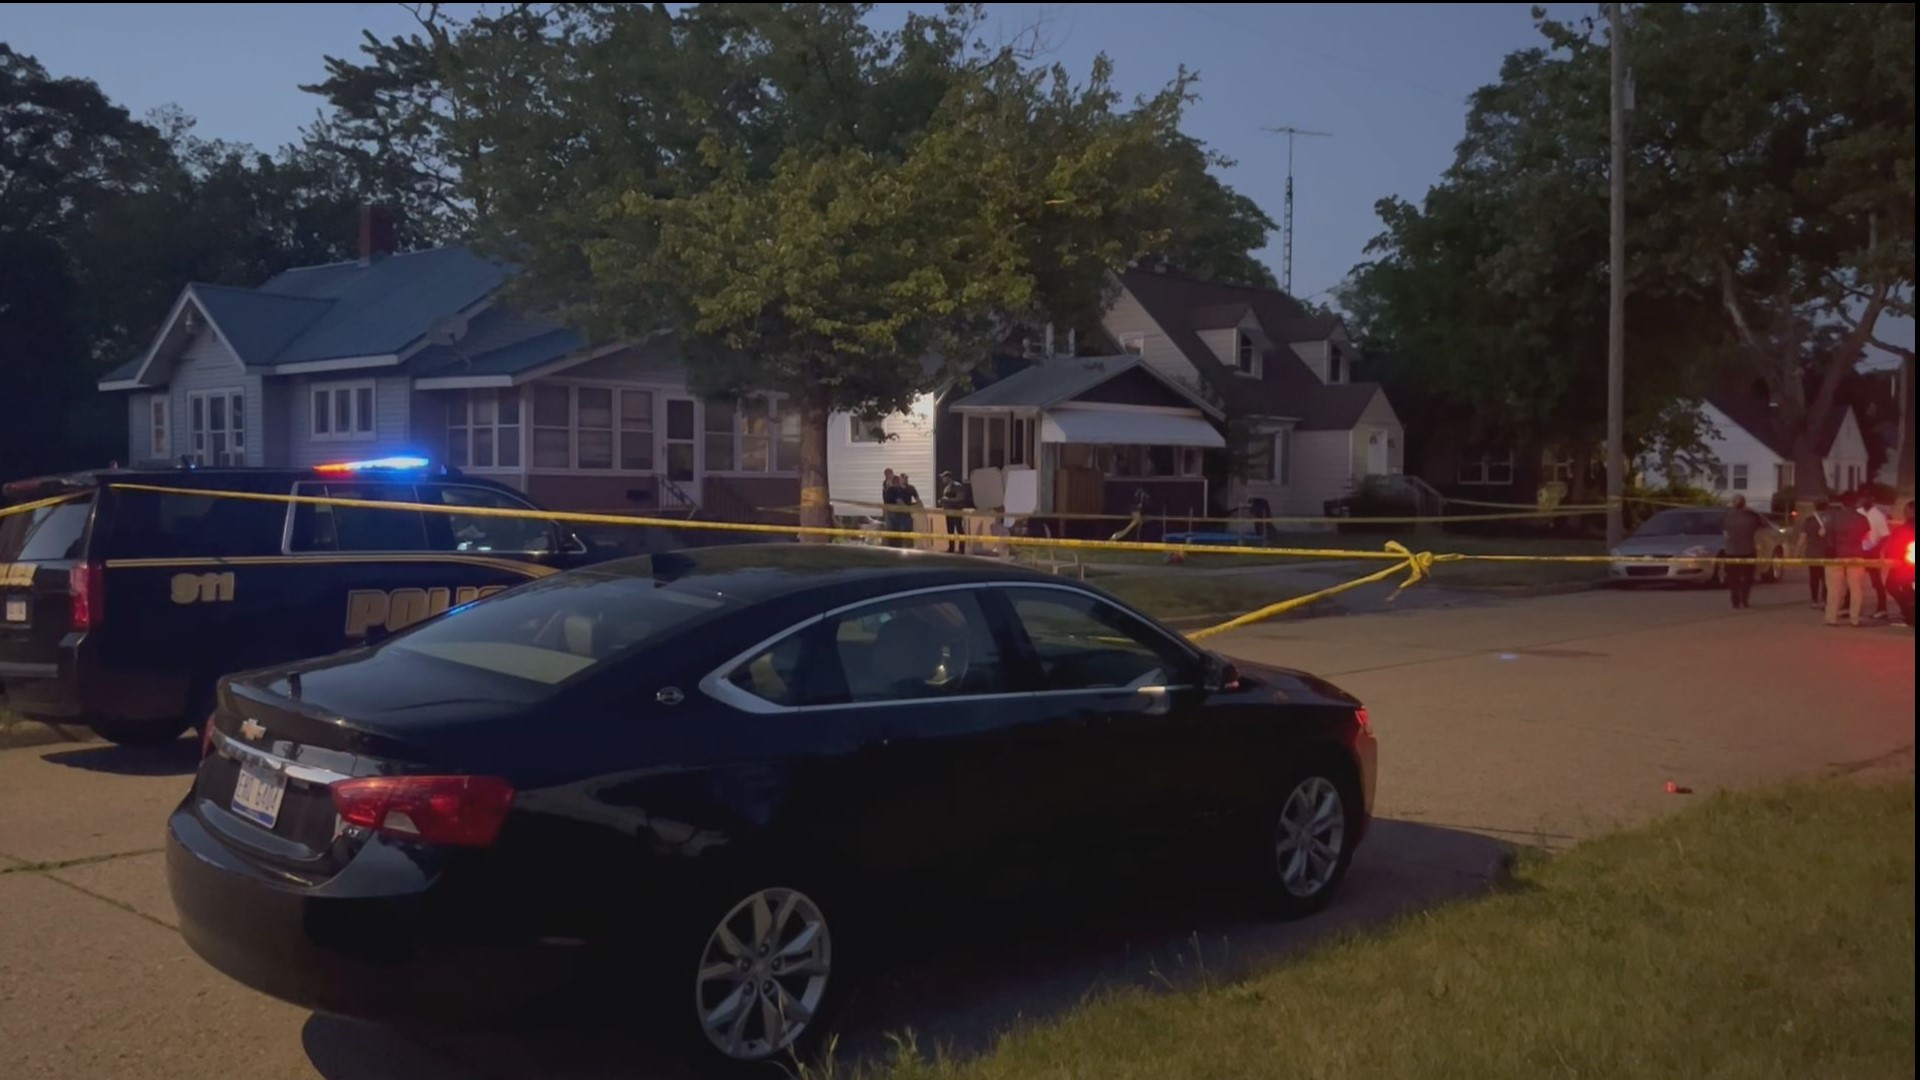 A 15-year-old was killed in a shooting in Muskegon Tuesday evening.